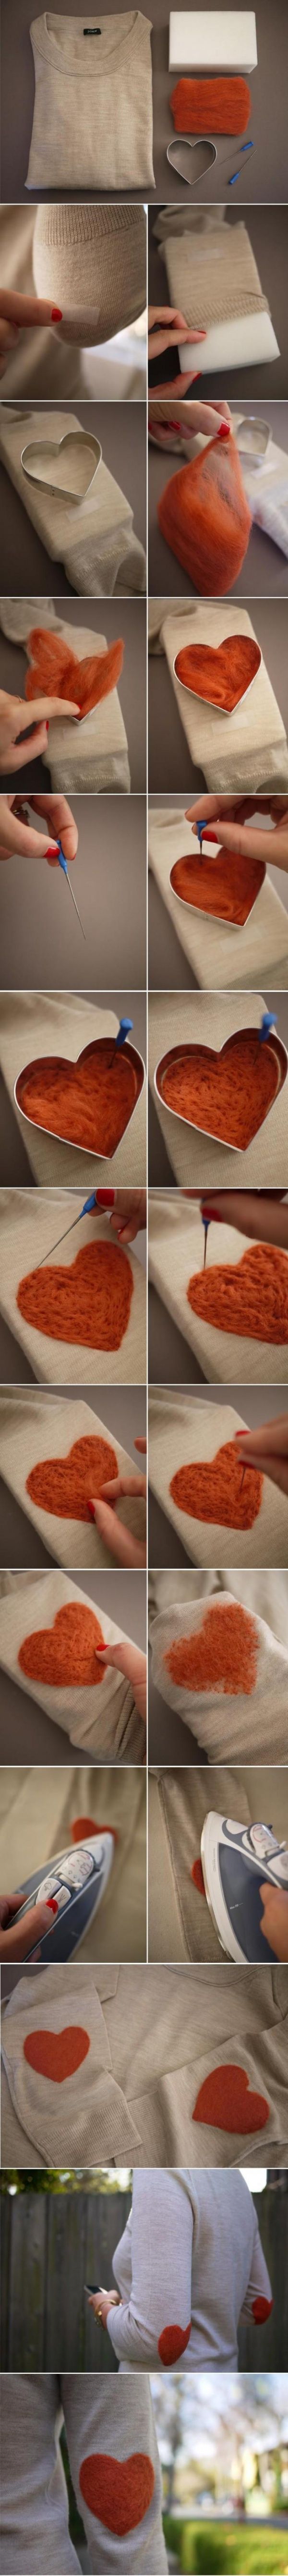 Okay so not hearts, but this is a cool idea.